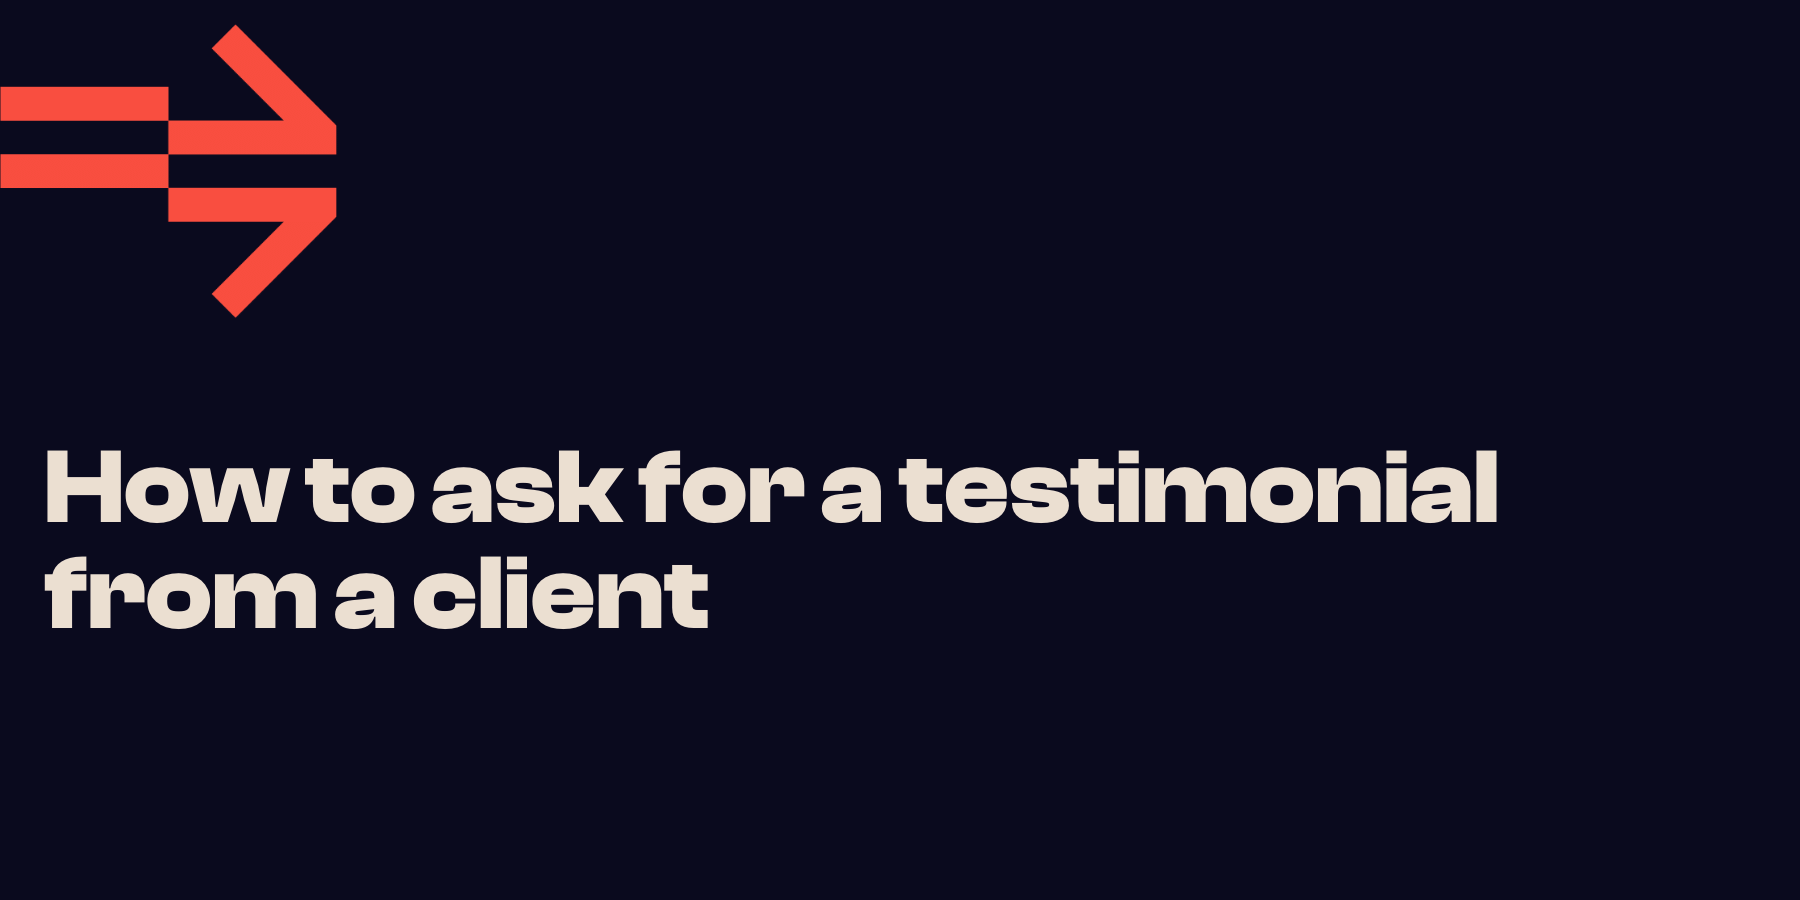 How to ask for a testimonial from a client